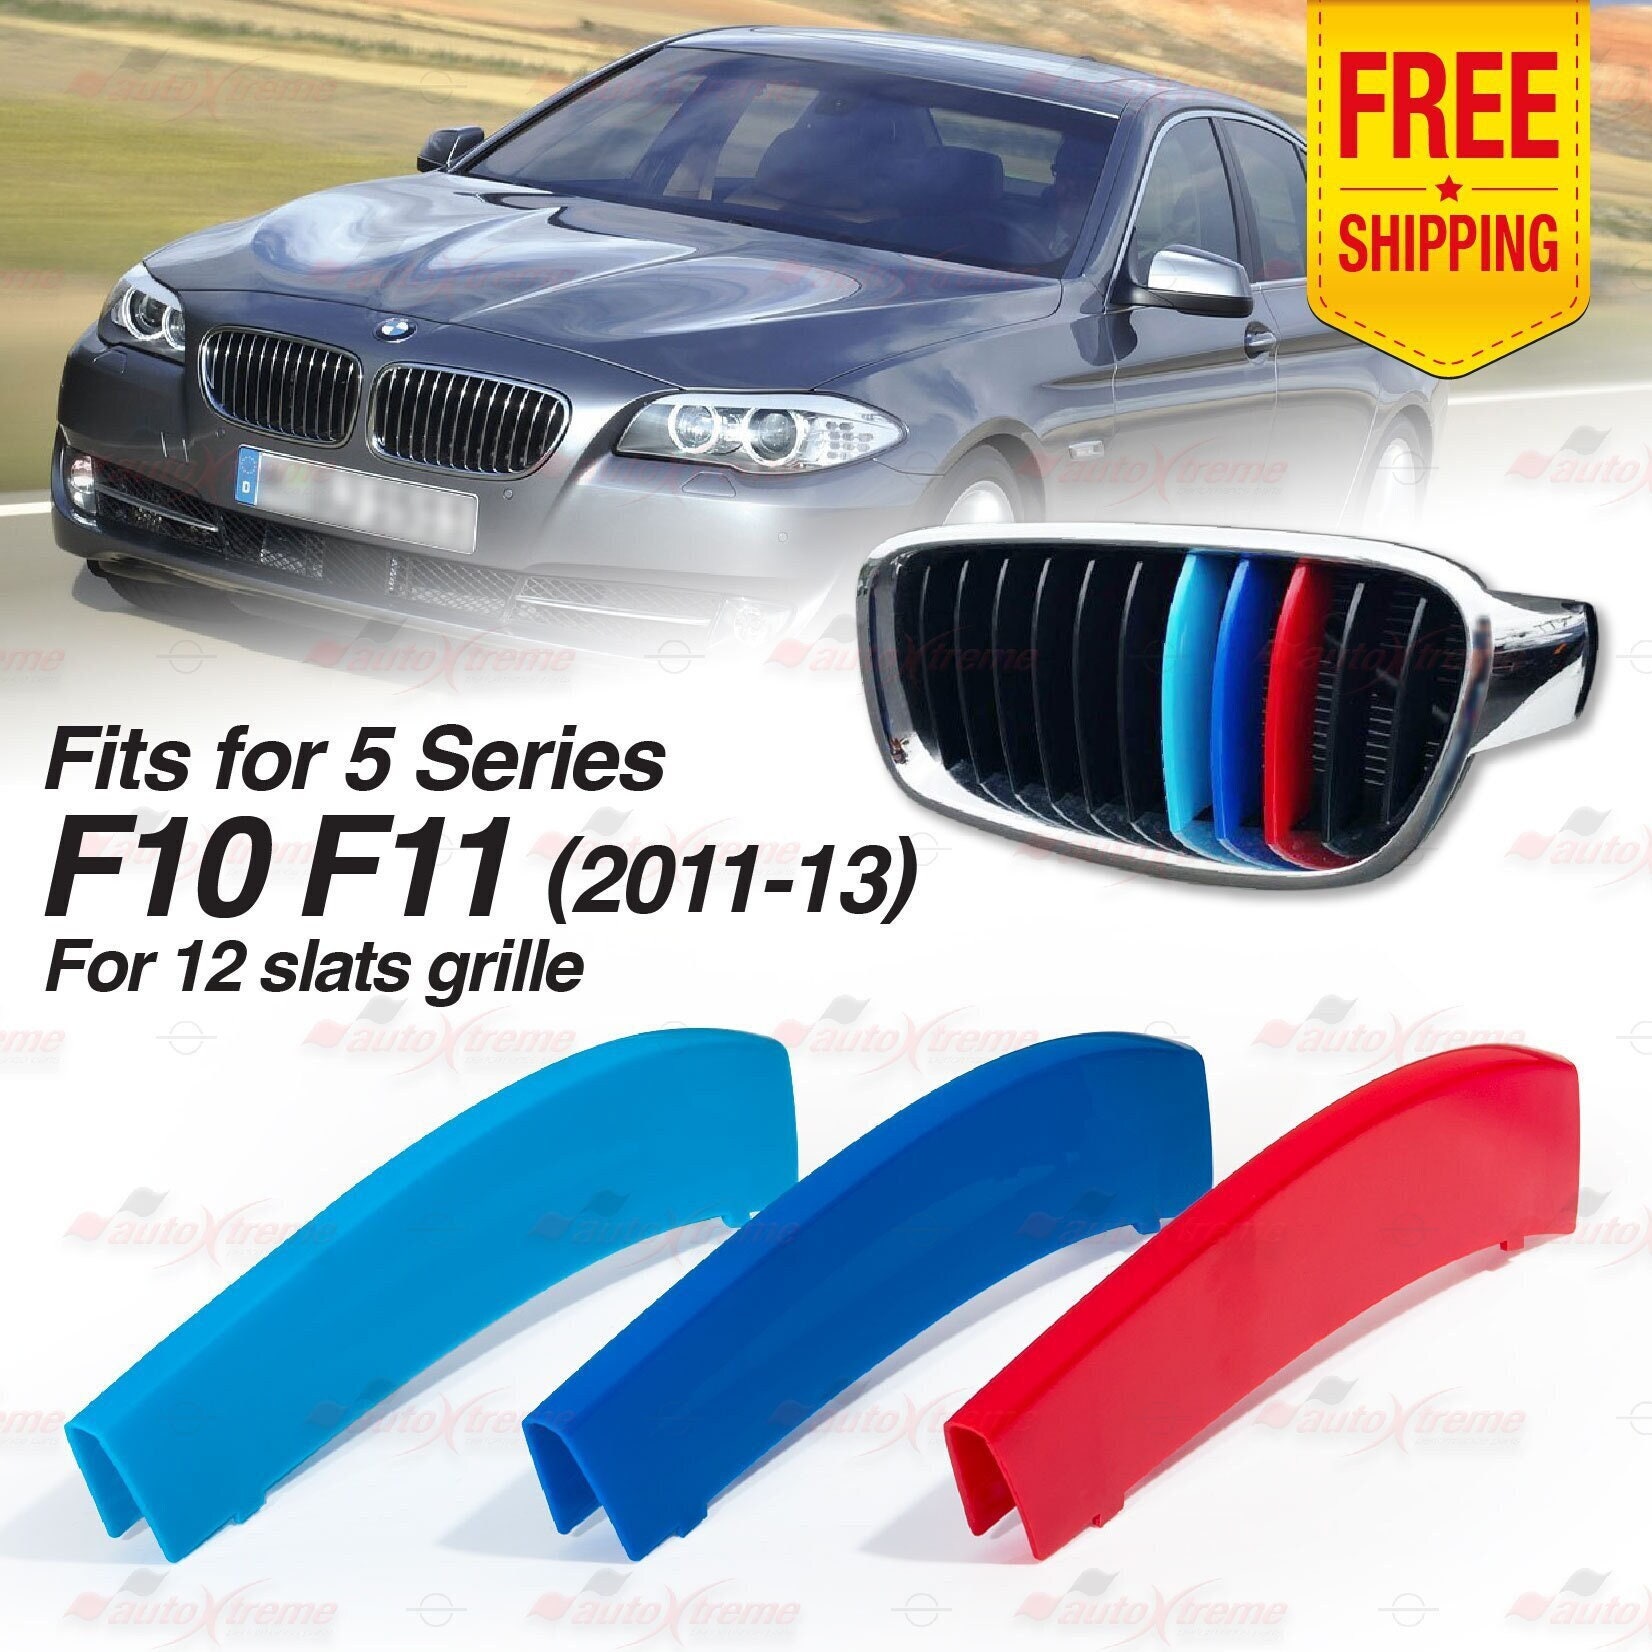 Bmw Grill Clip - Best Price in Singapore - Jan 2024